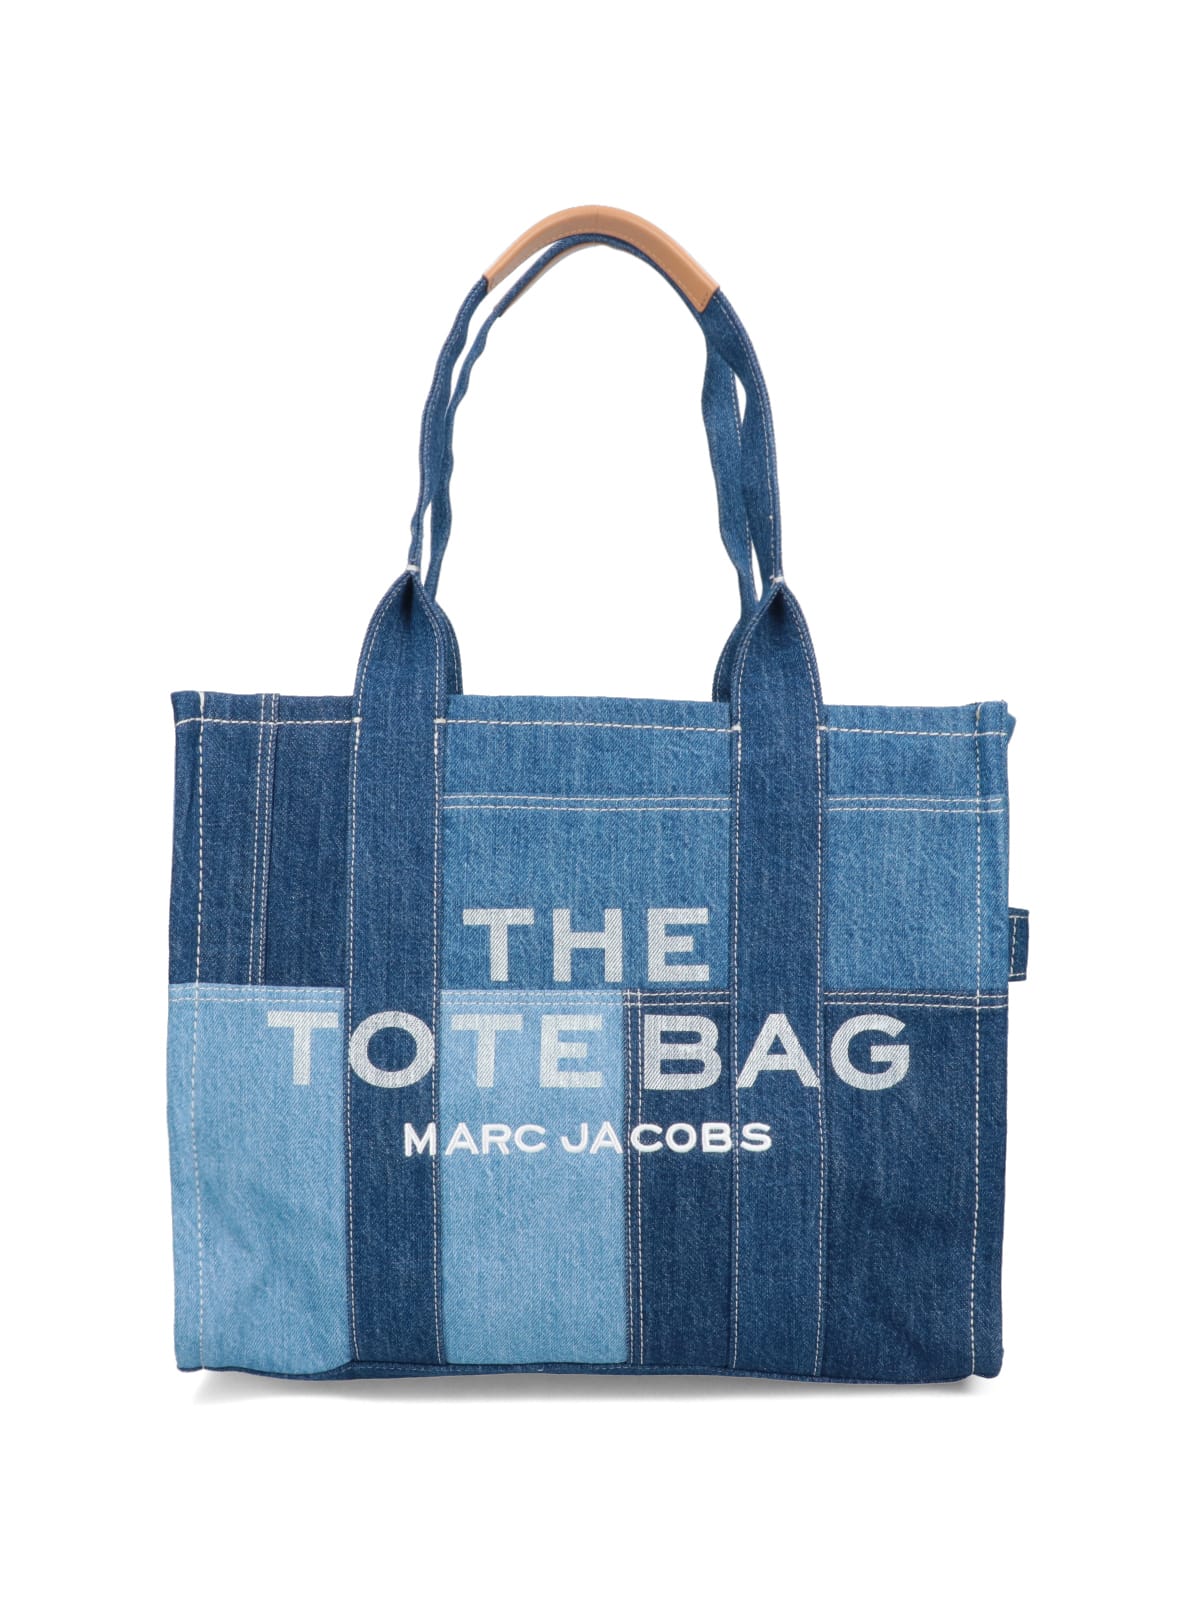 MARC JACOBS TOTE